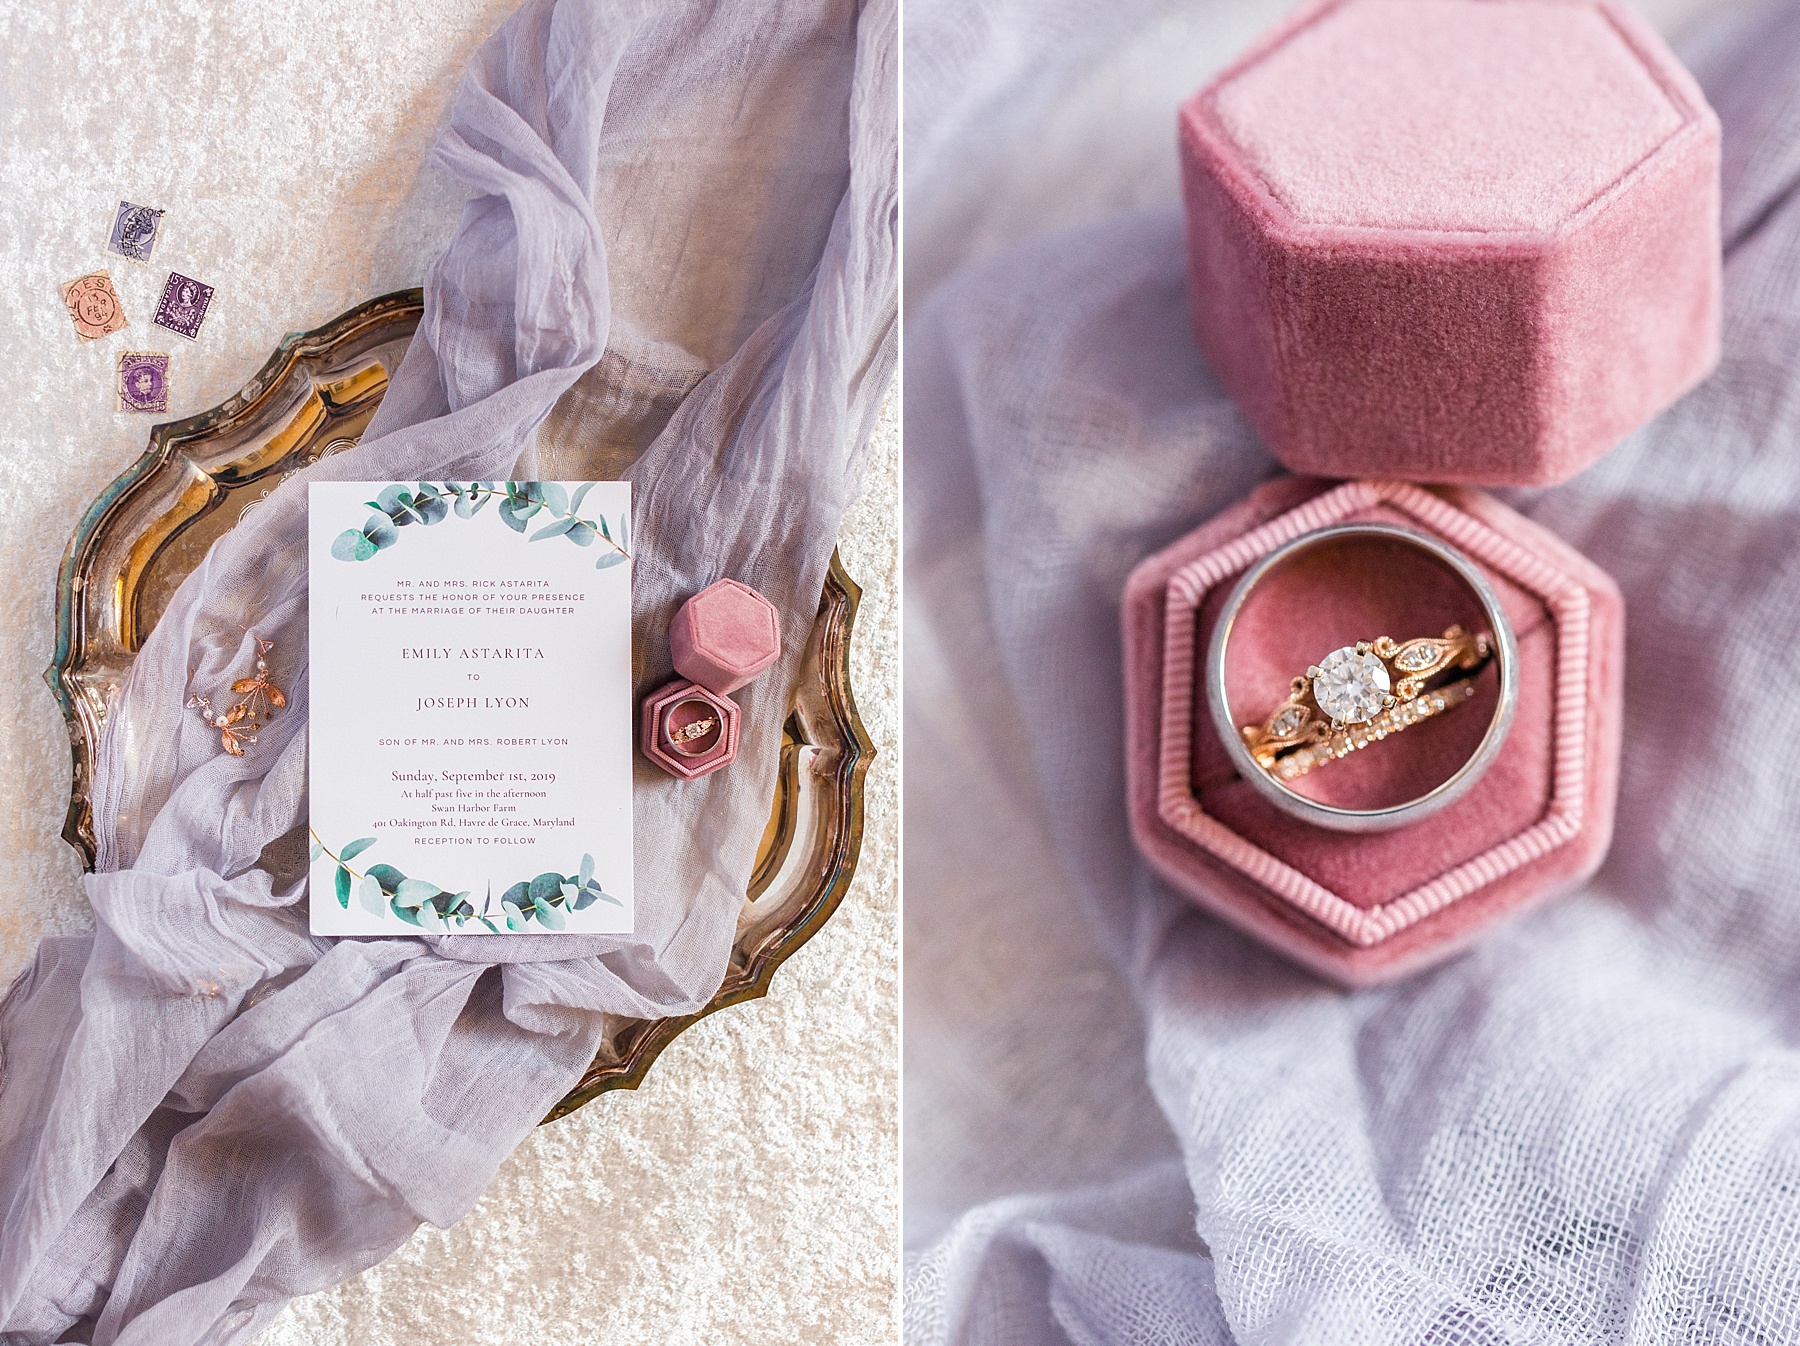 wedding ring and invitation for Swan Harbor wedding day with Alexandra Mandato Photography